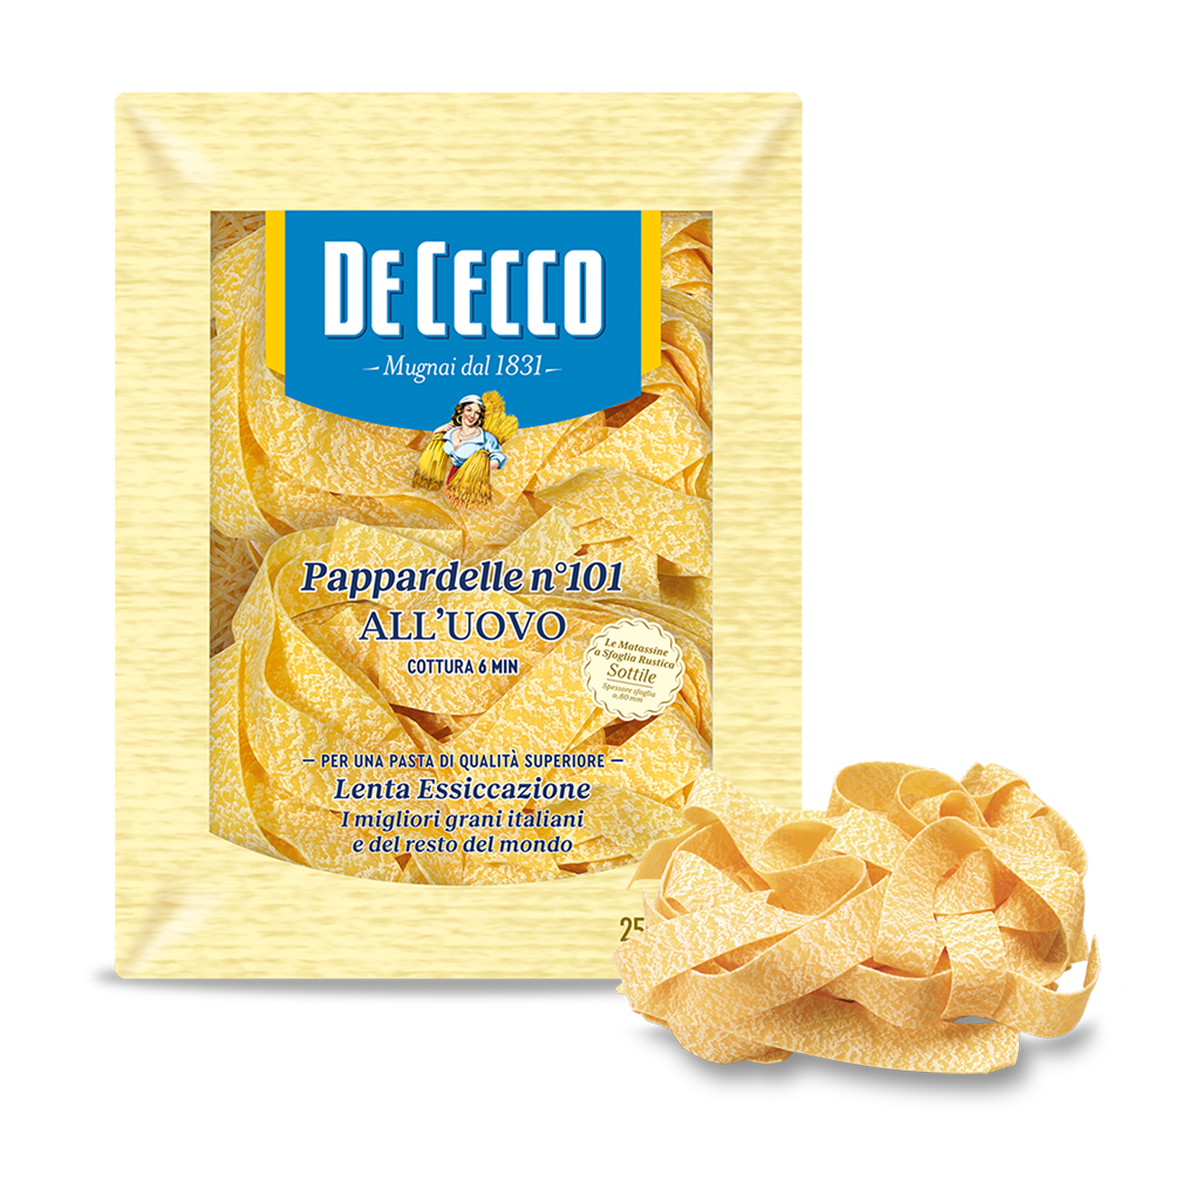 Dececco Pappardelle N 101